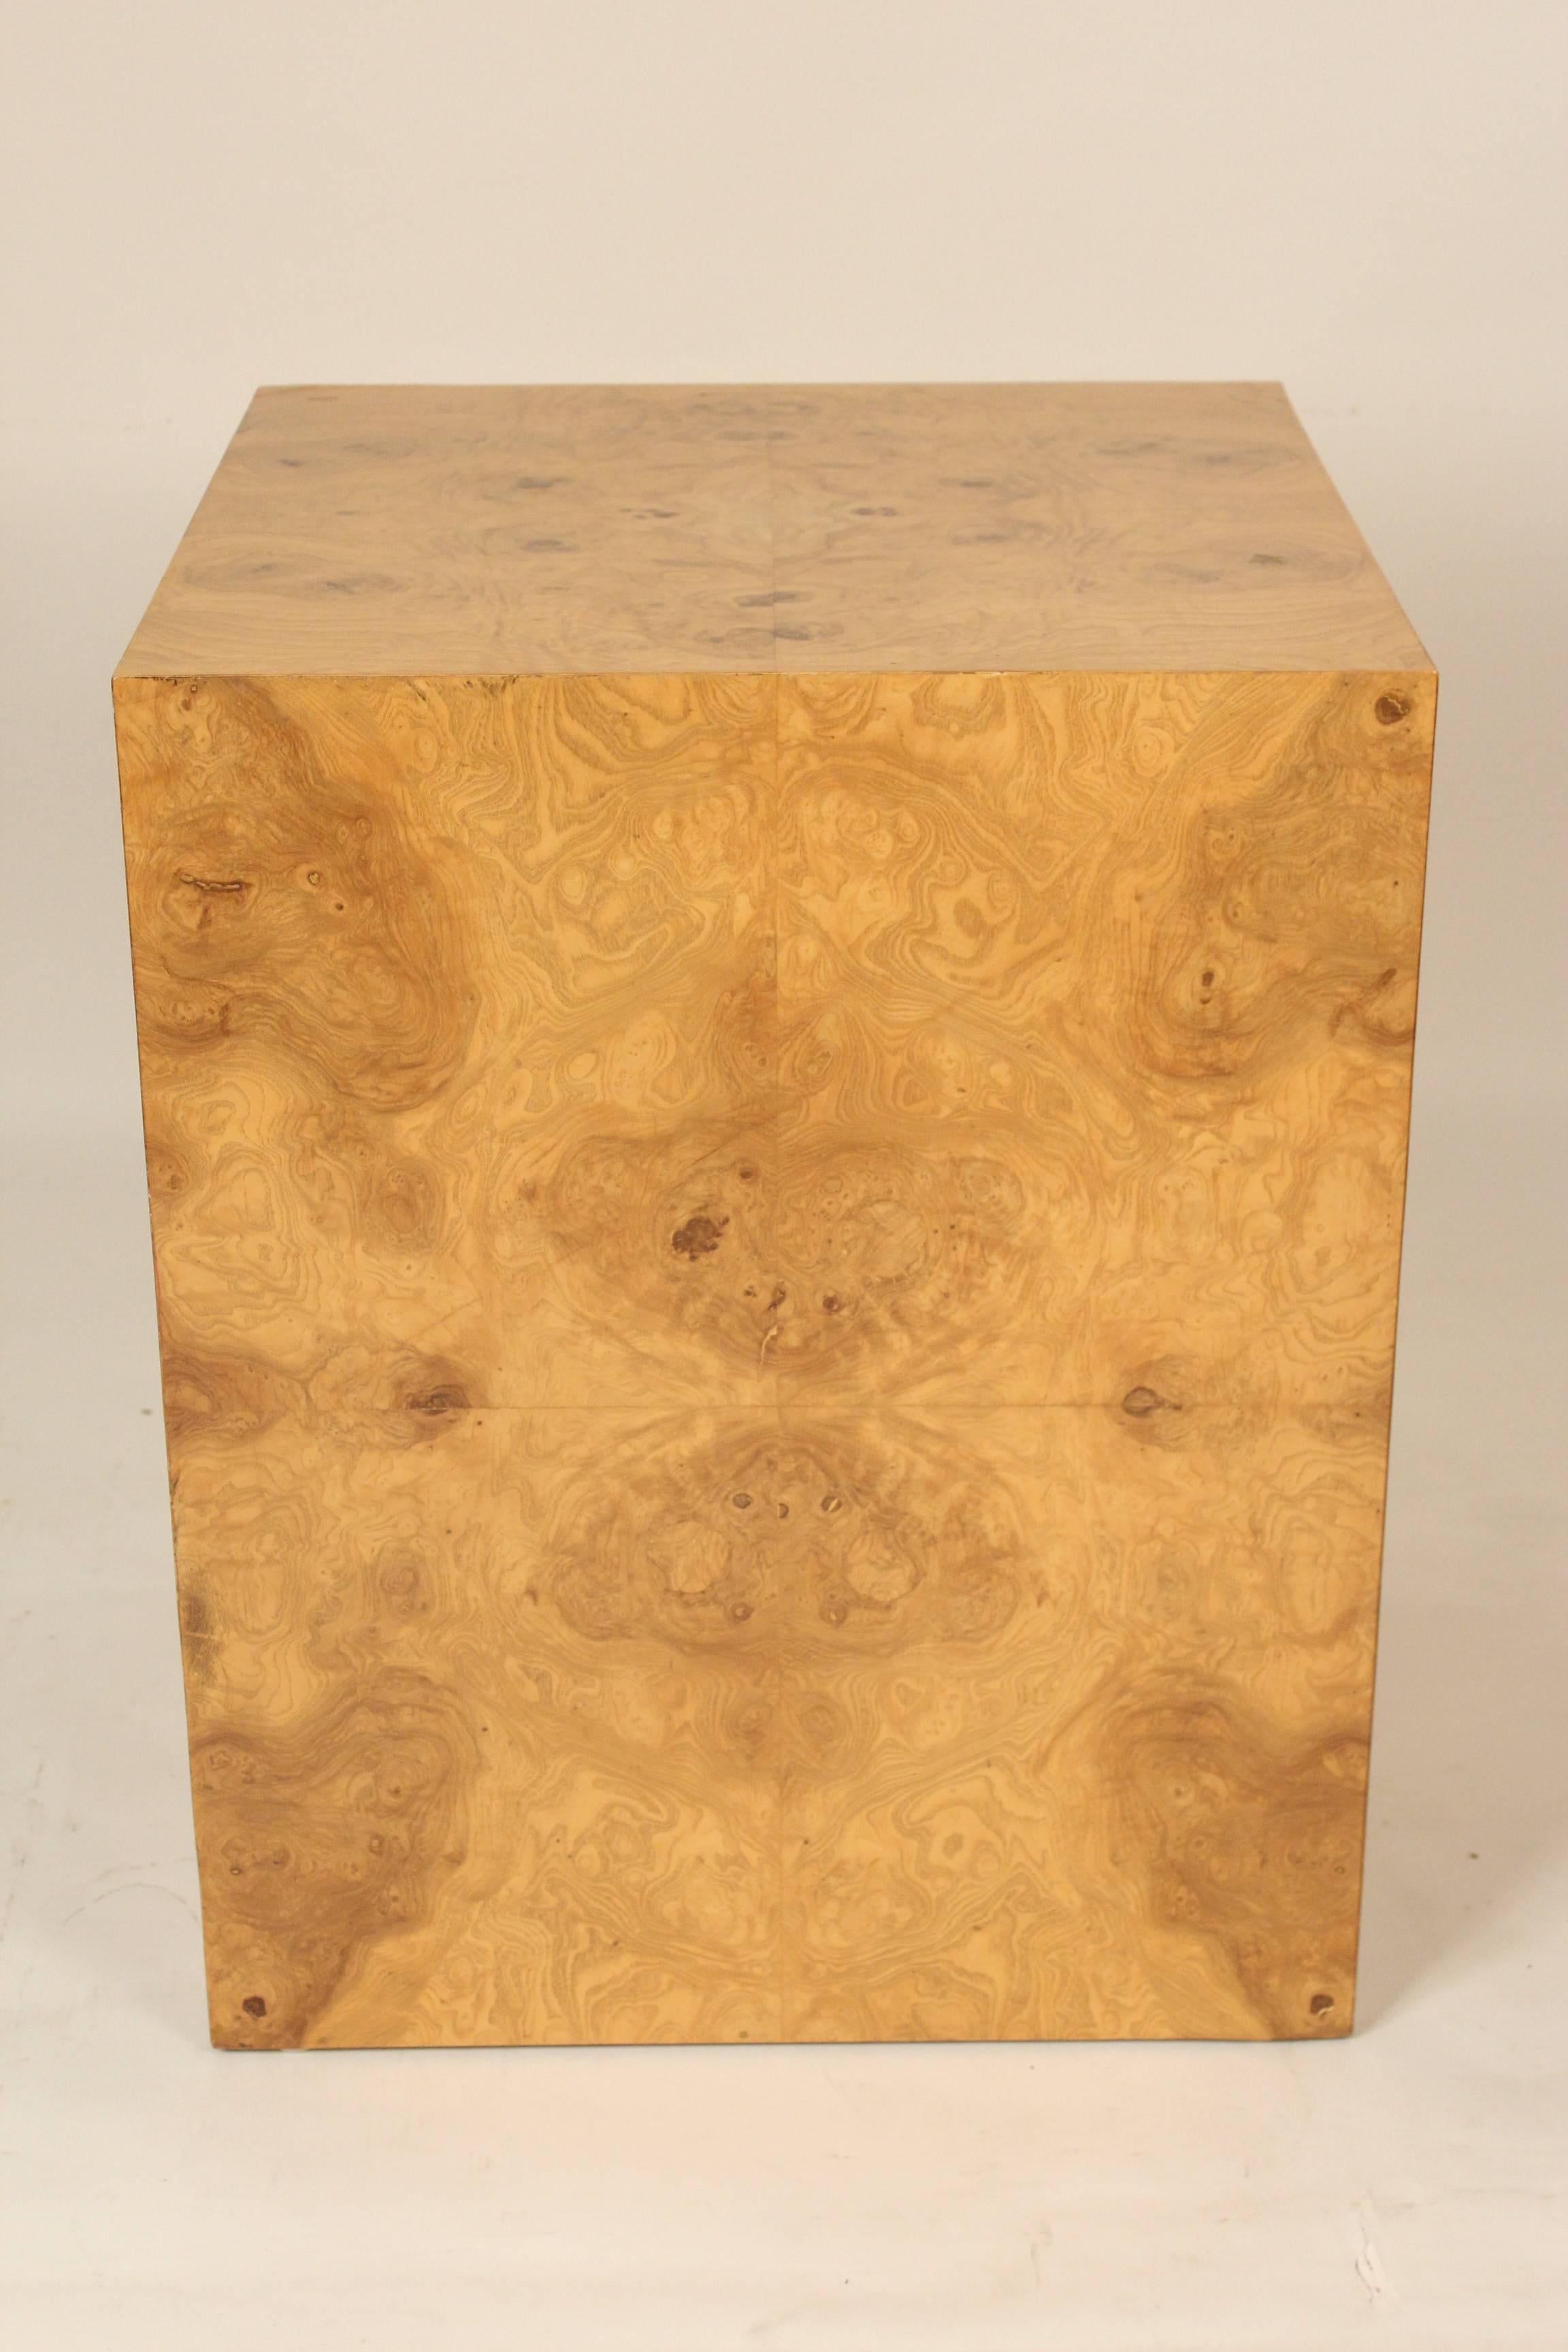 Burled cube form occasional table or pedestal attributed to Milo Baughman, circa 1980s.